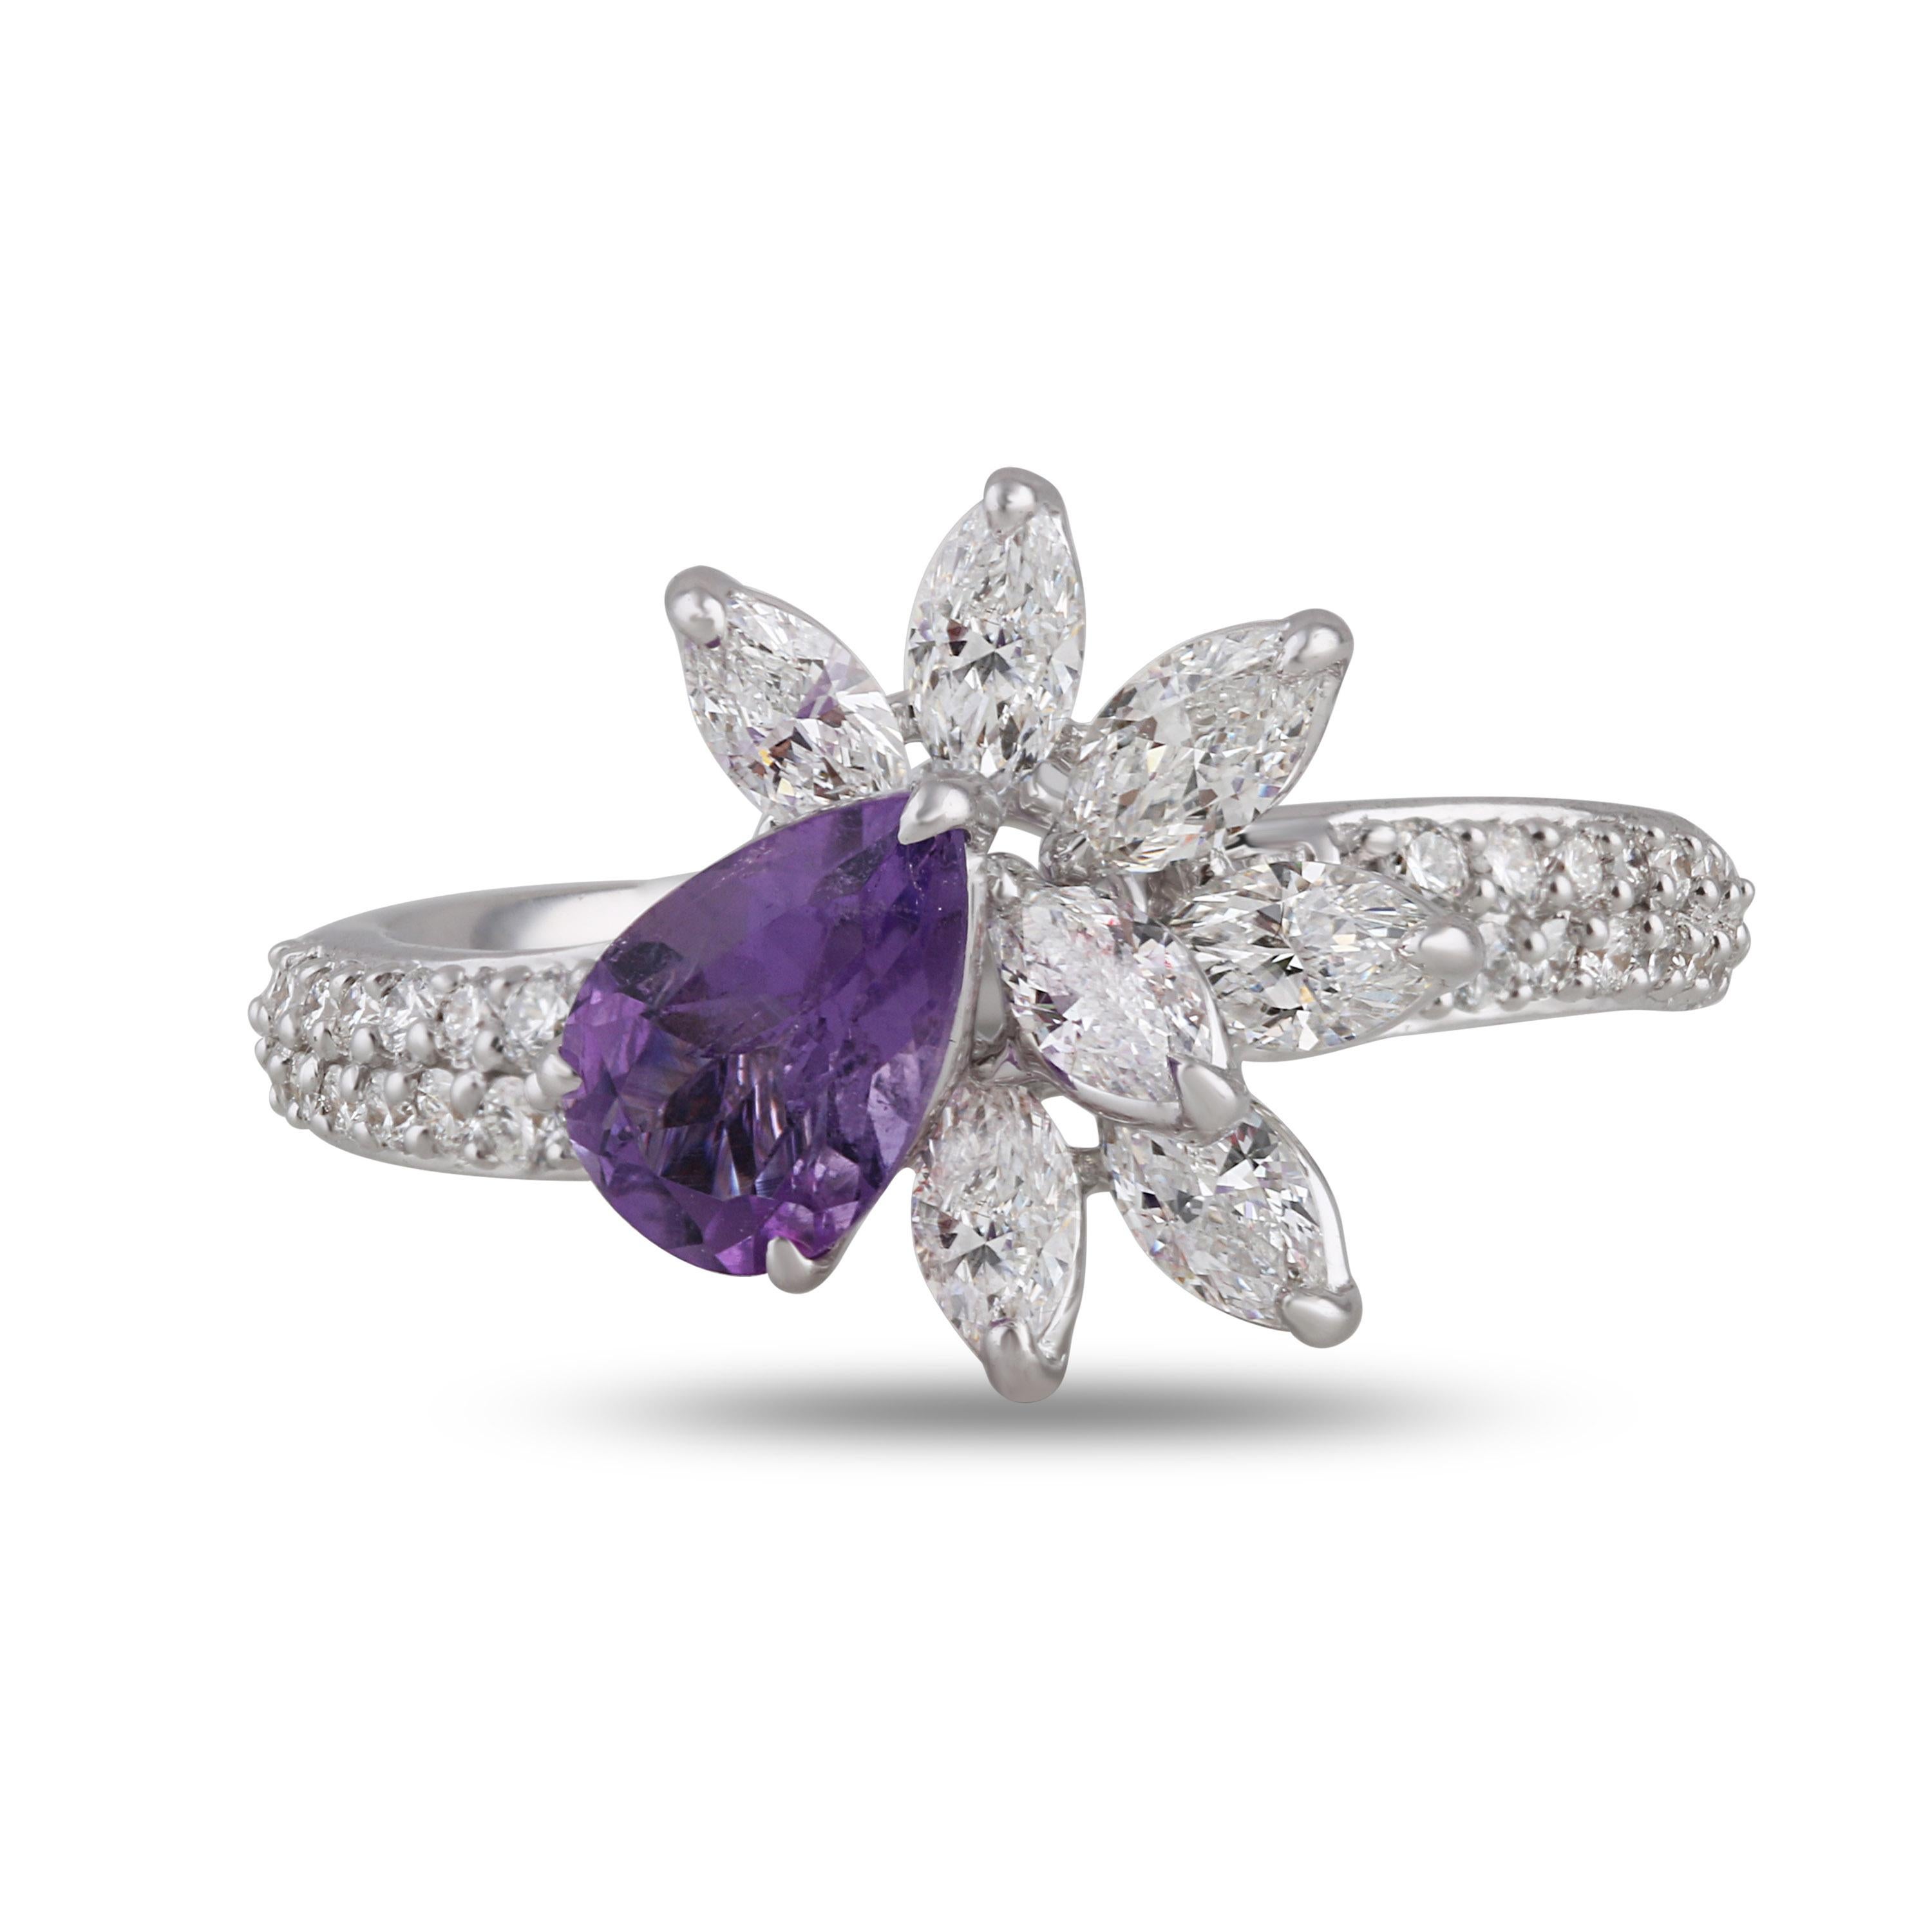 Pear Cut Studio Rêves 18 Karat White Gold Diamond Ring with Amethyst For Sale